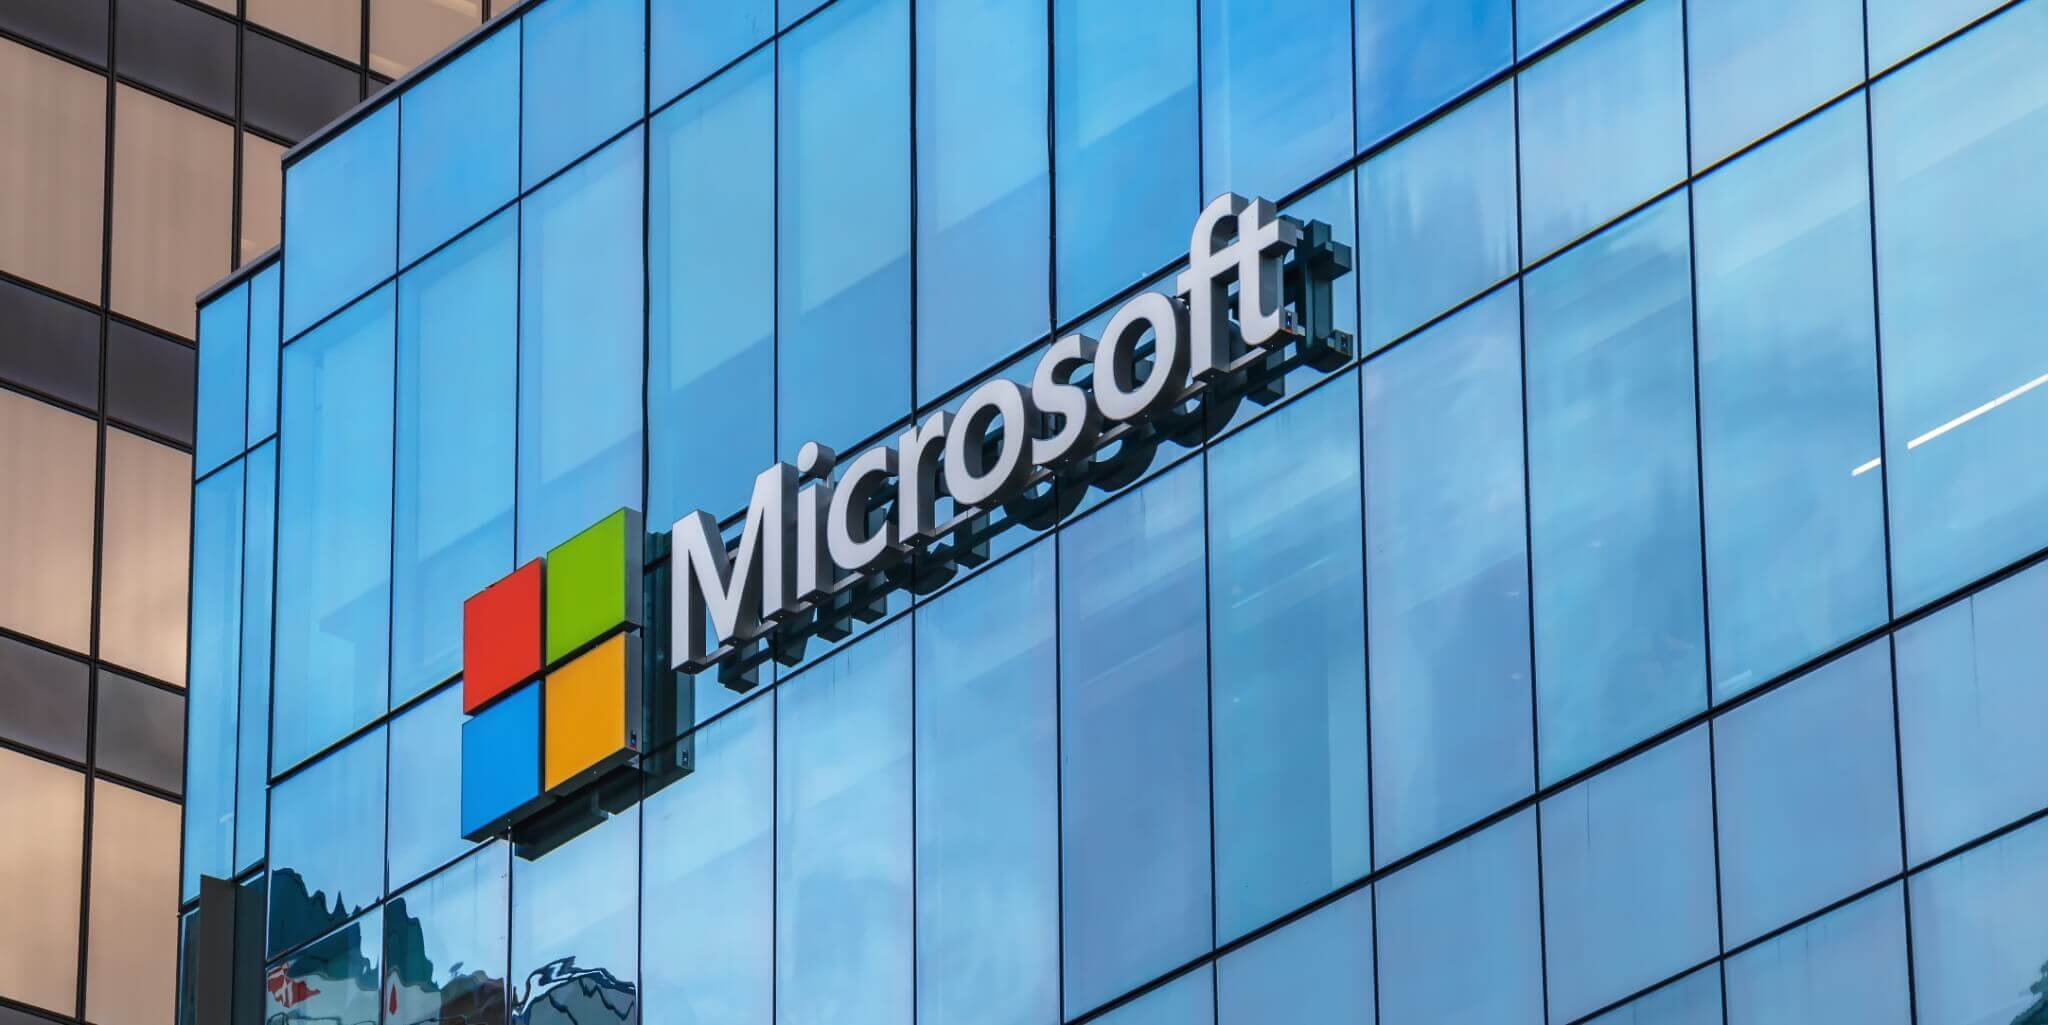 Microsoft has shared Tips on Safety and Data Protection during COVID-19